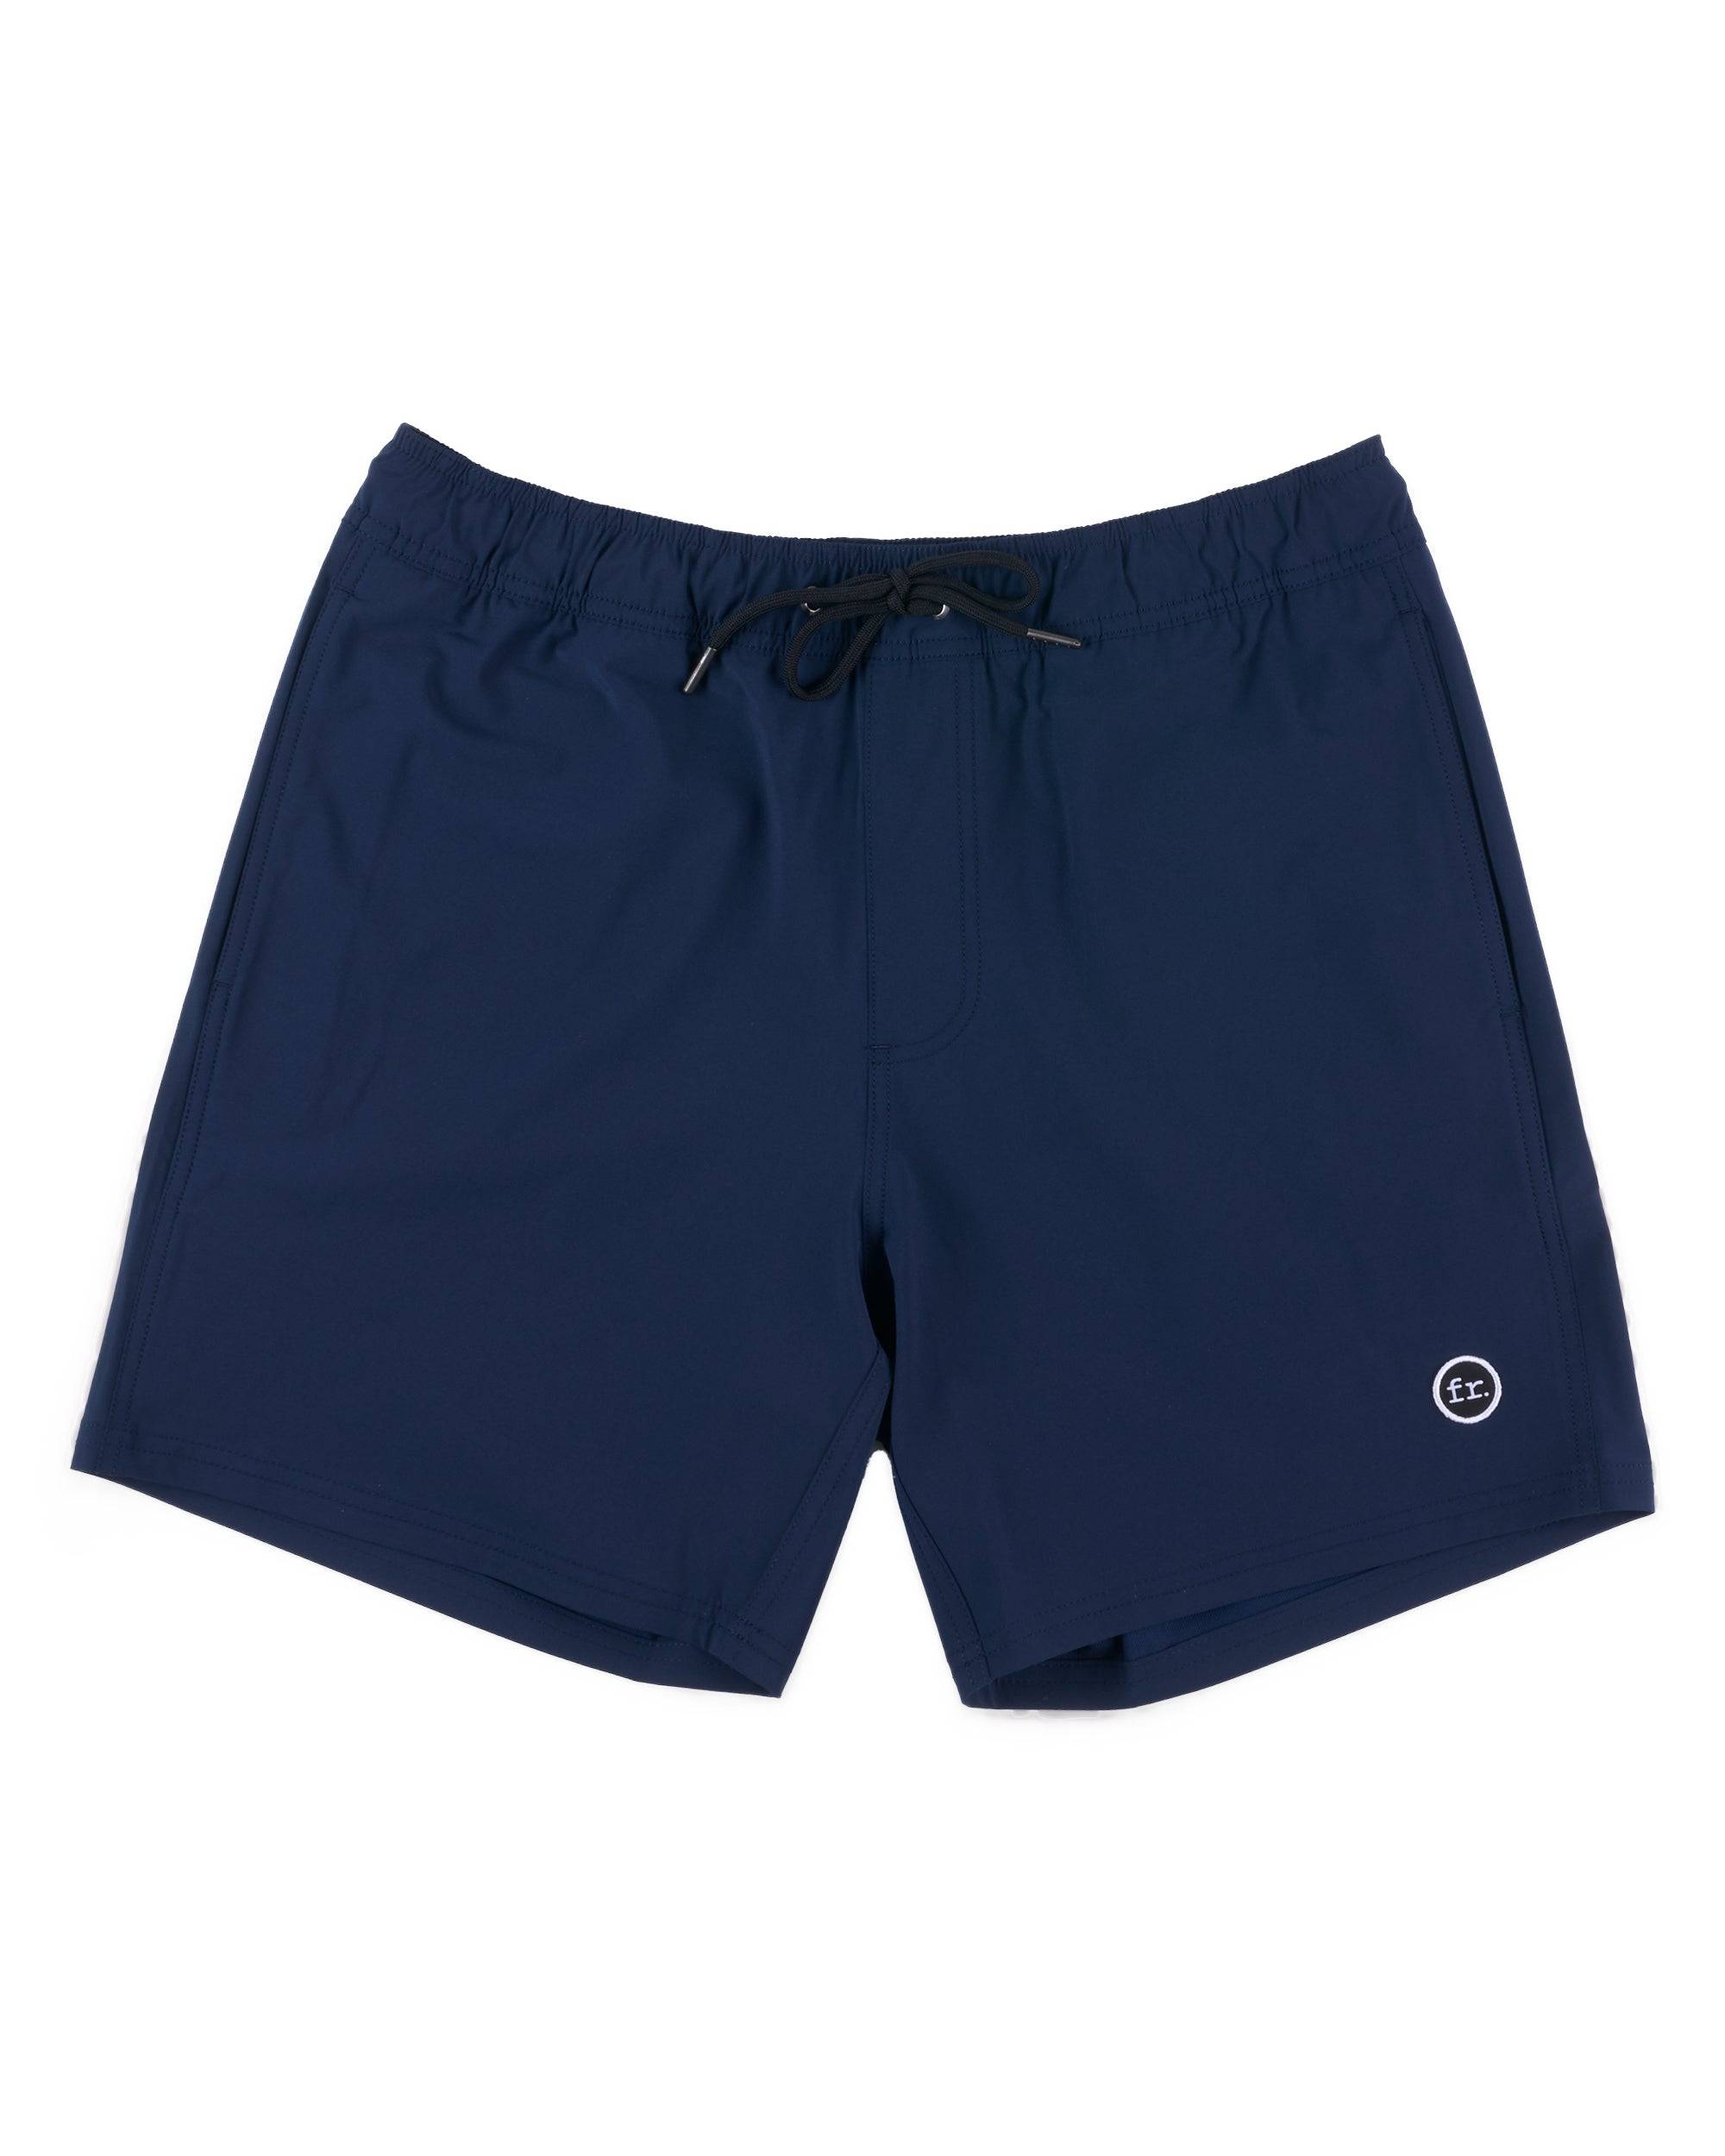 FR. Utility Boardshorts Navy – Foreign Rider Co.